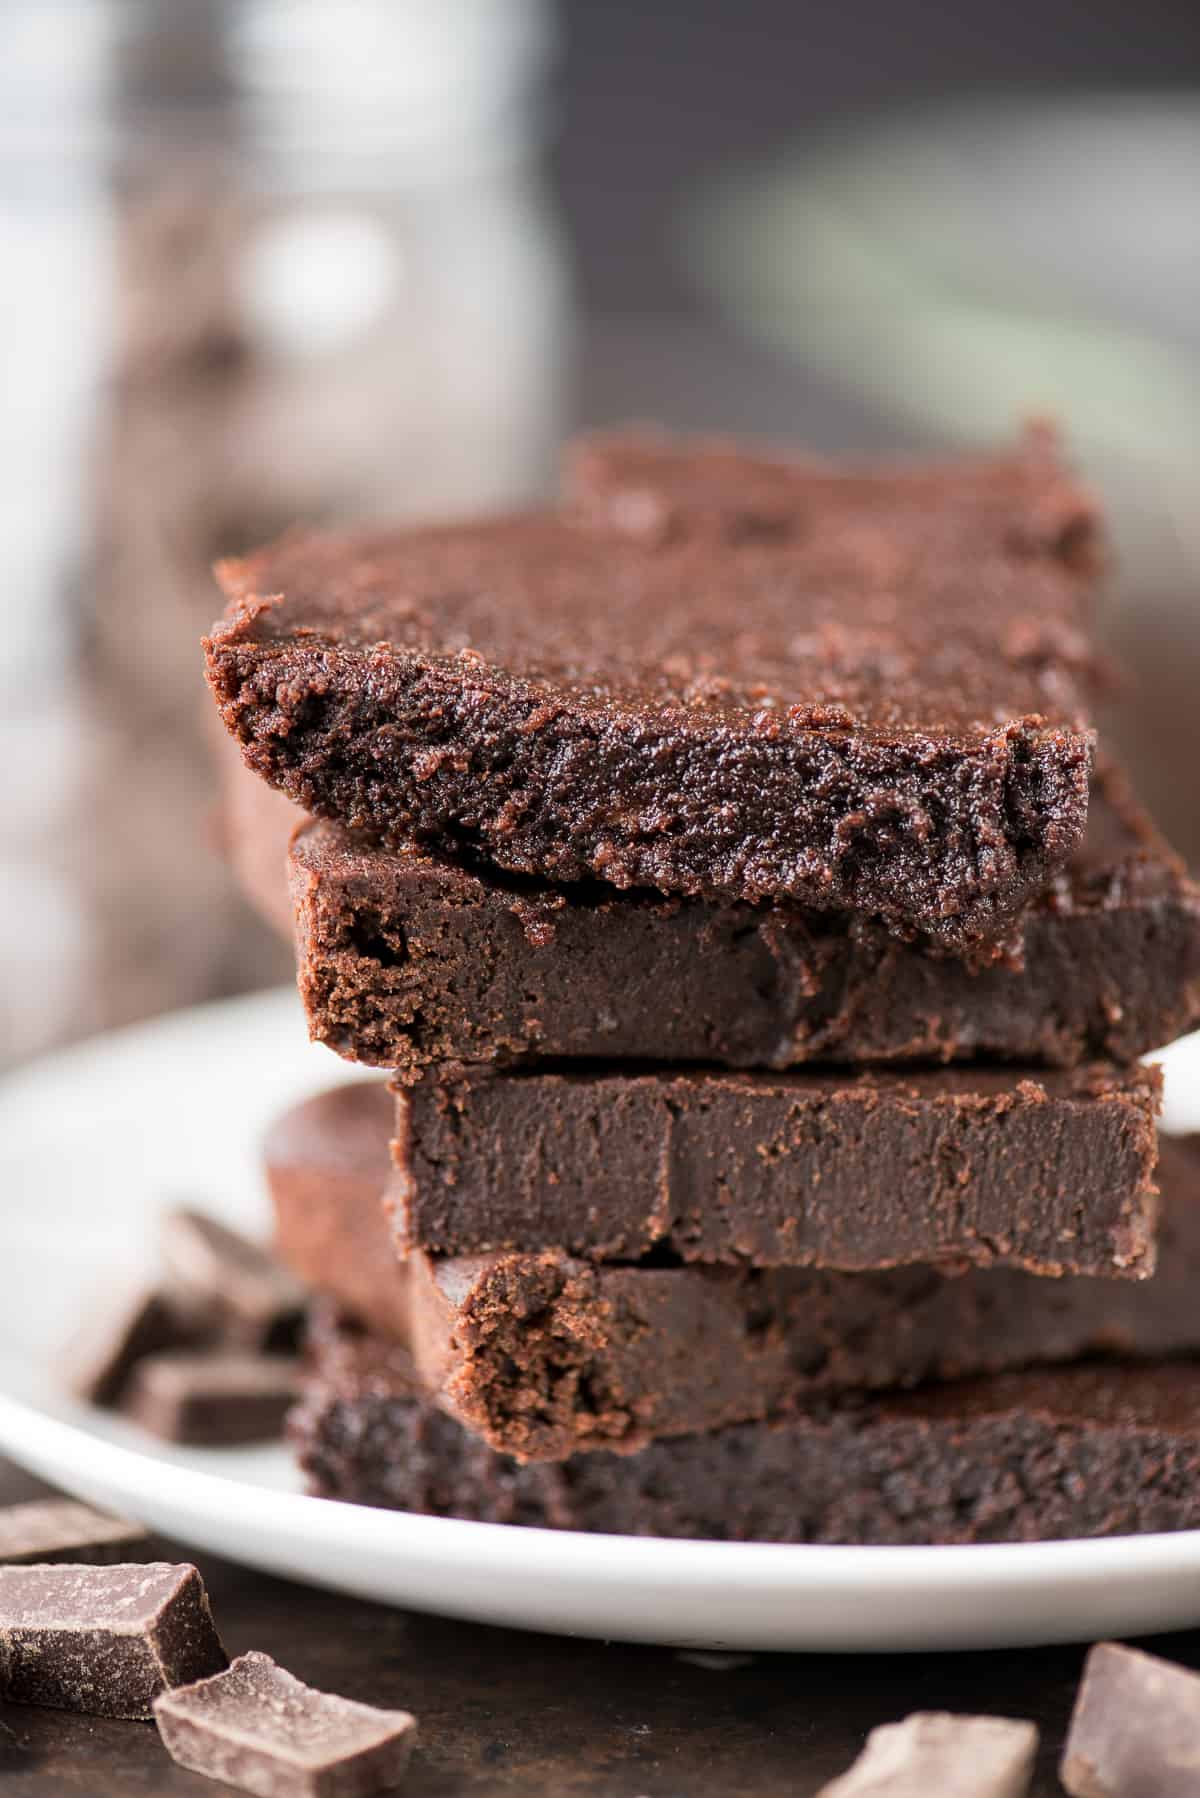 Five healthier fudgy brownies surrounded by chocolate on a white plate.